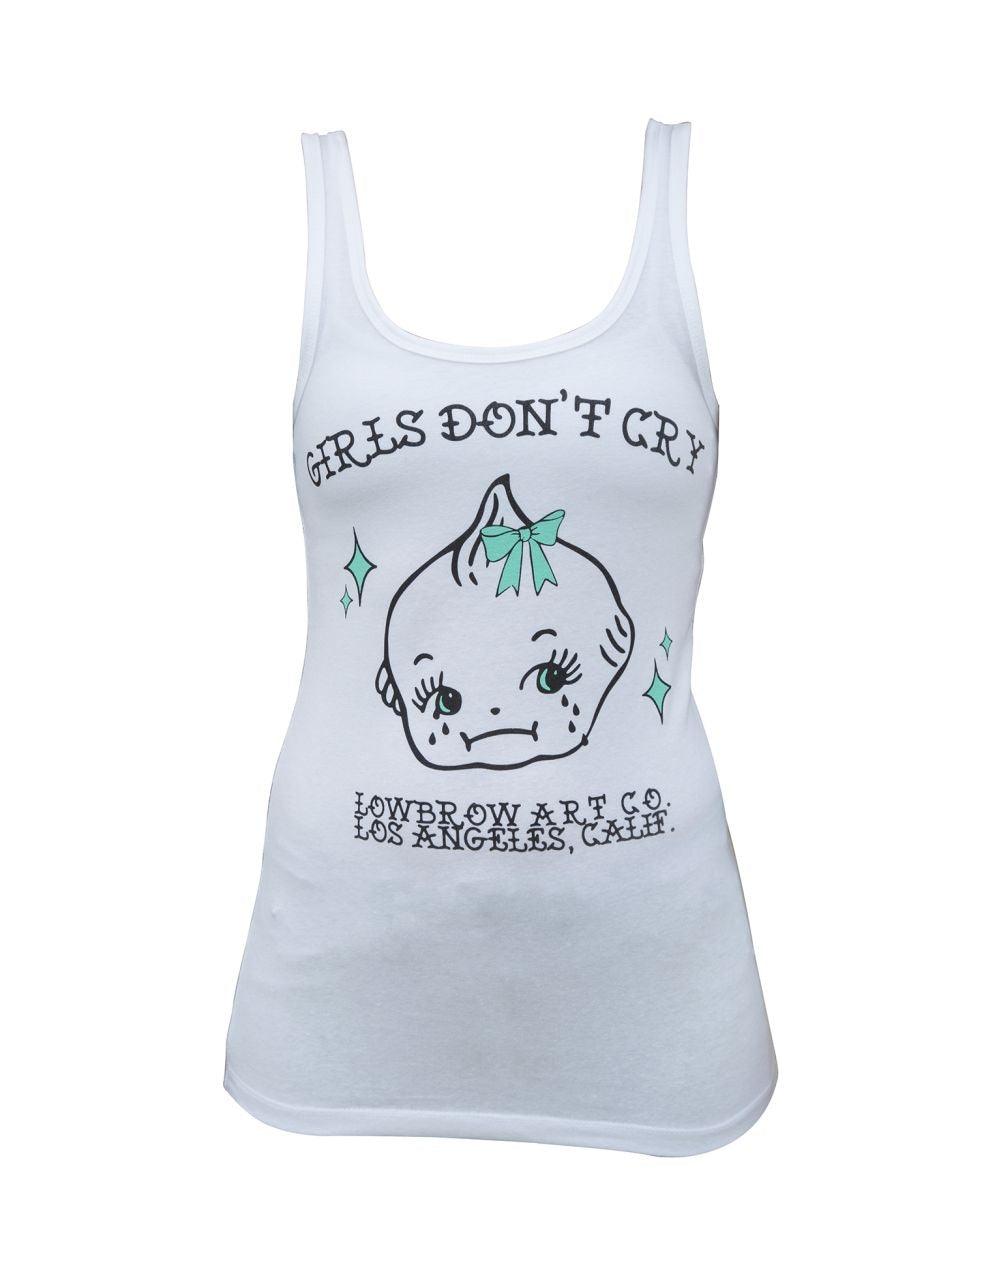 Lowbrow Girls Don’t Cry Womens Tank Top - Flyclothing LLC